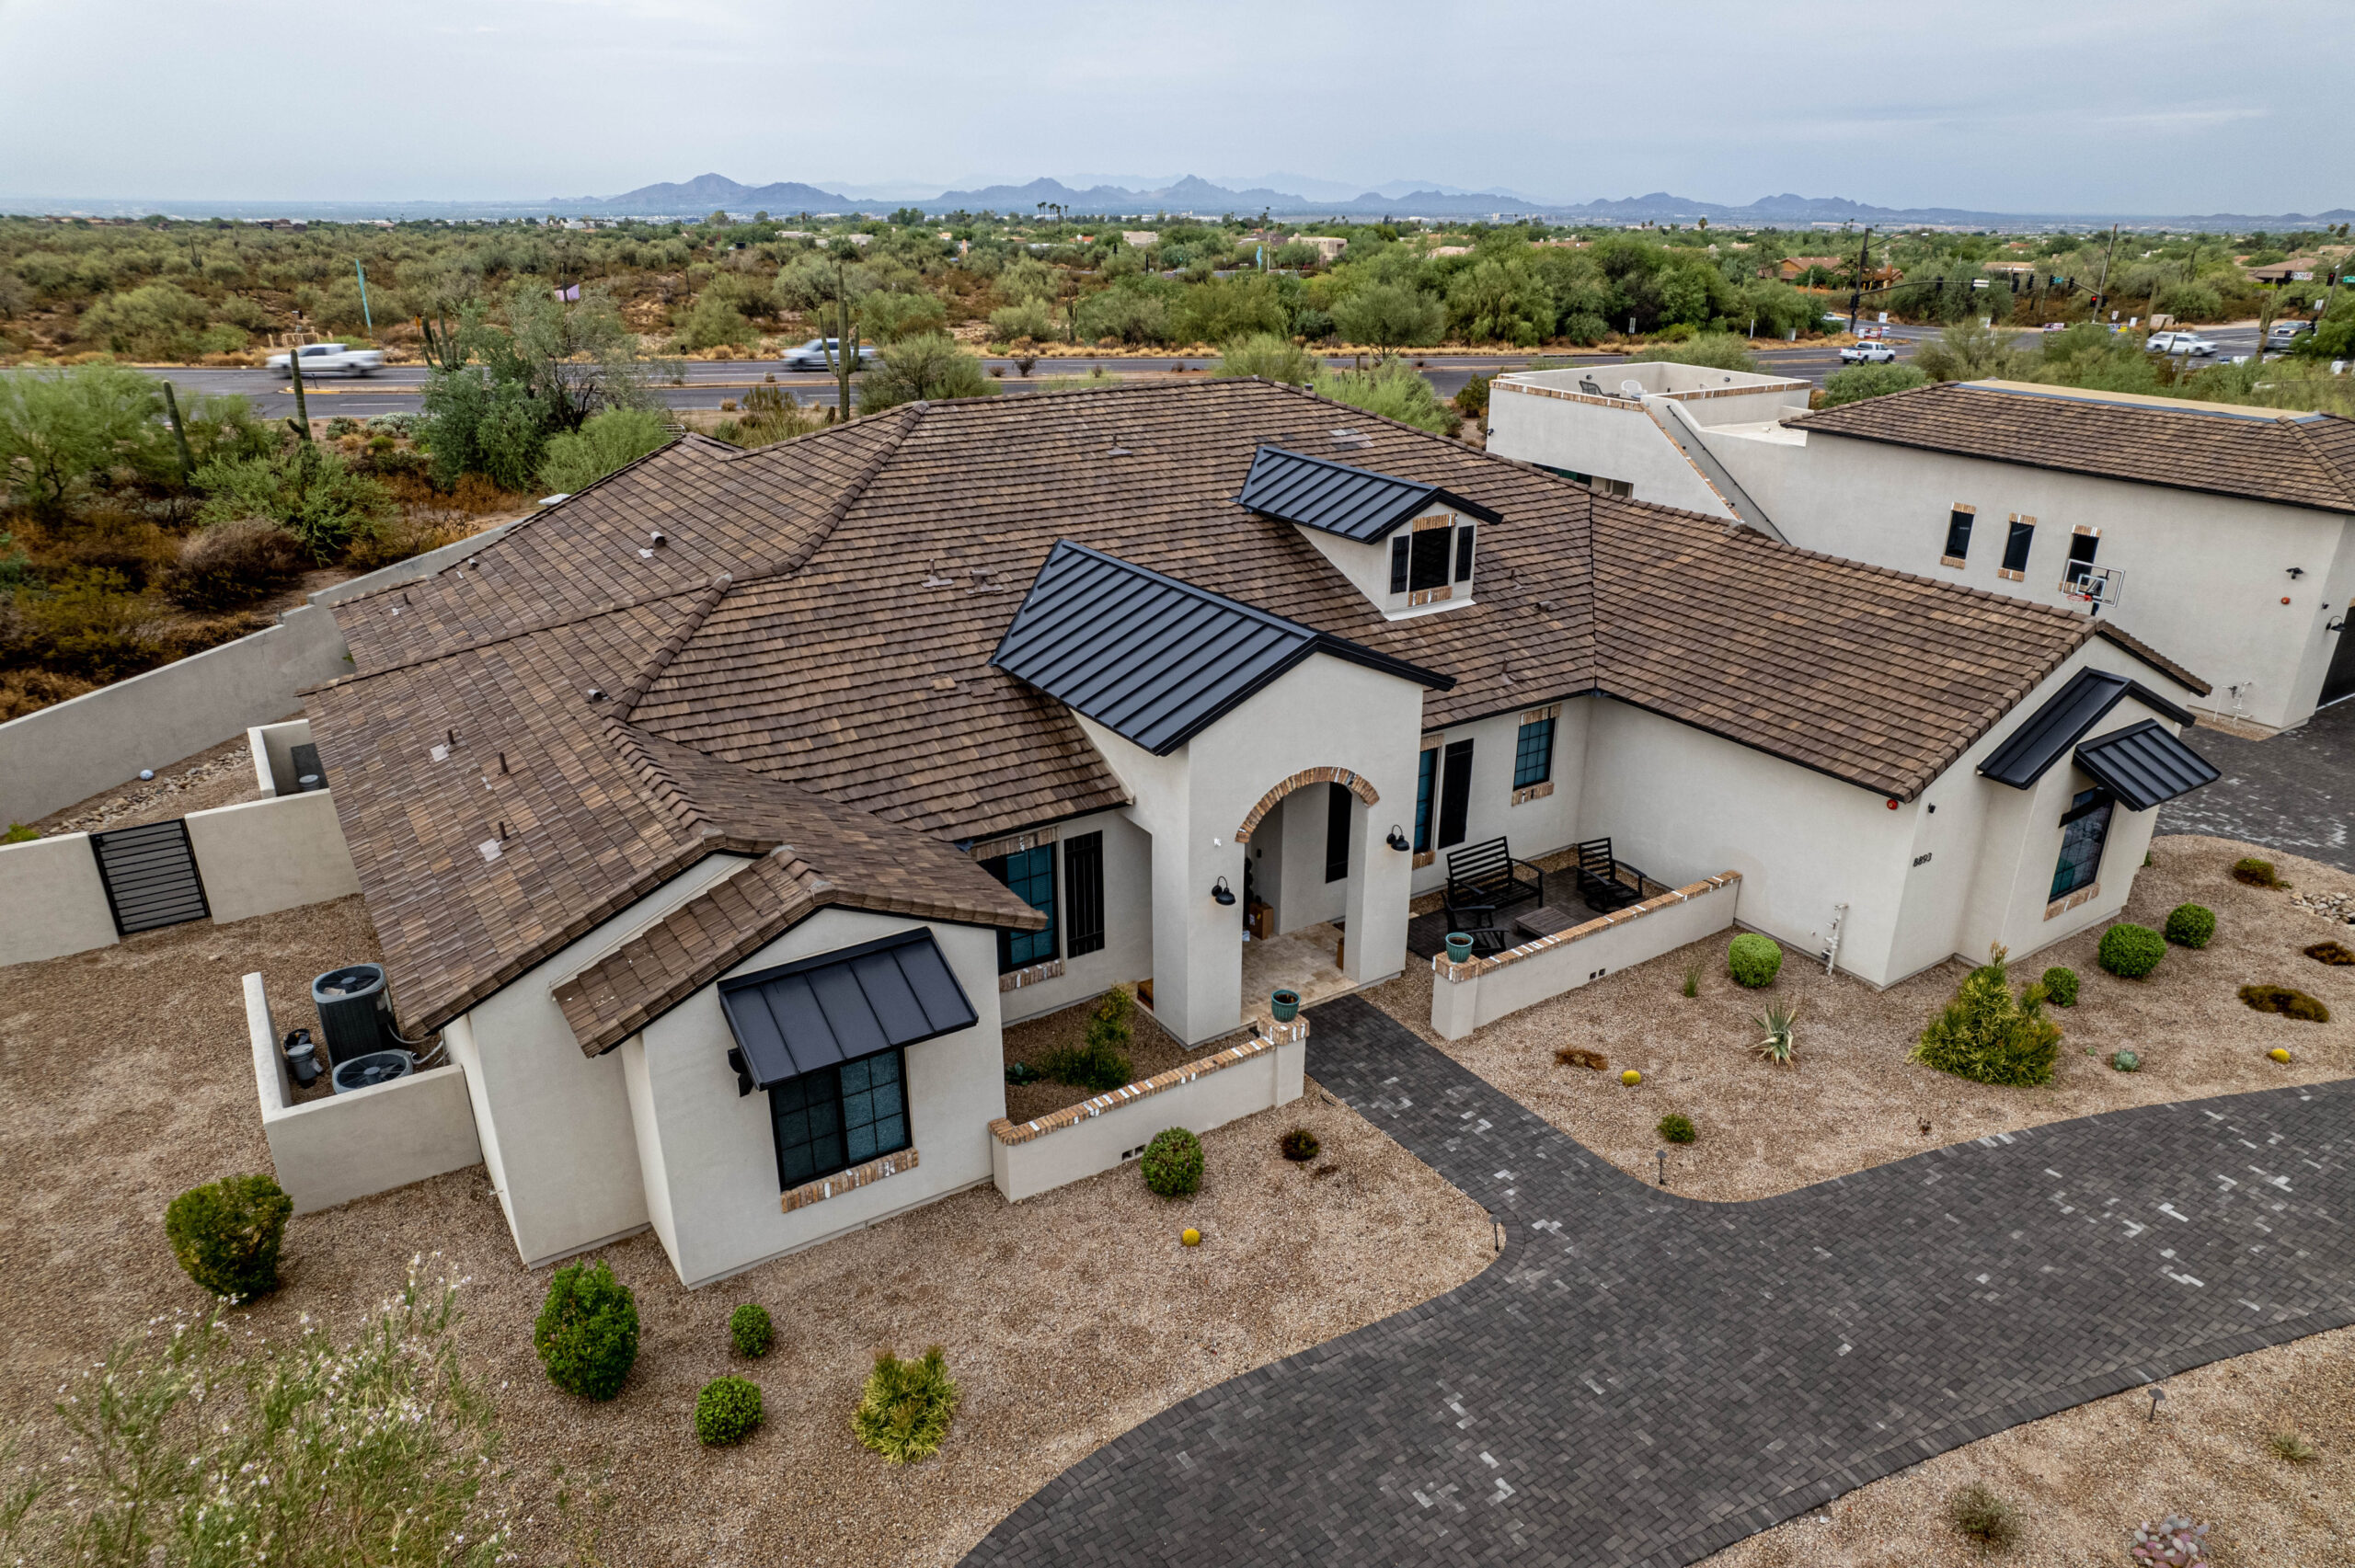 Aerial view showcasing the quality of tile re-roofing by Behmer in Grayhawk.